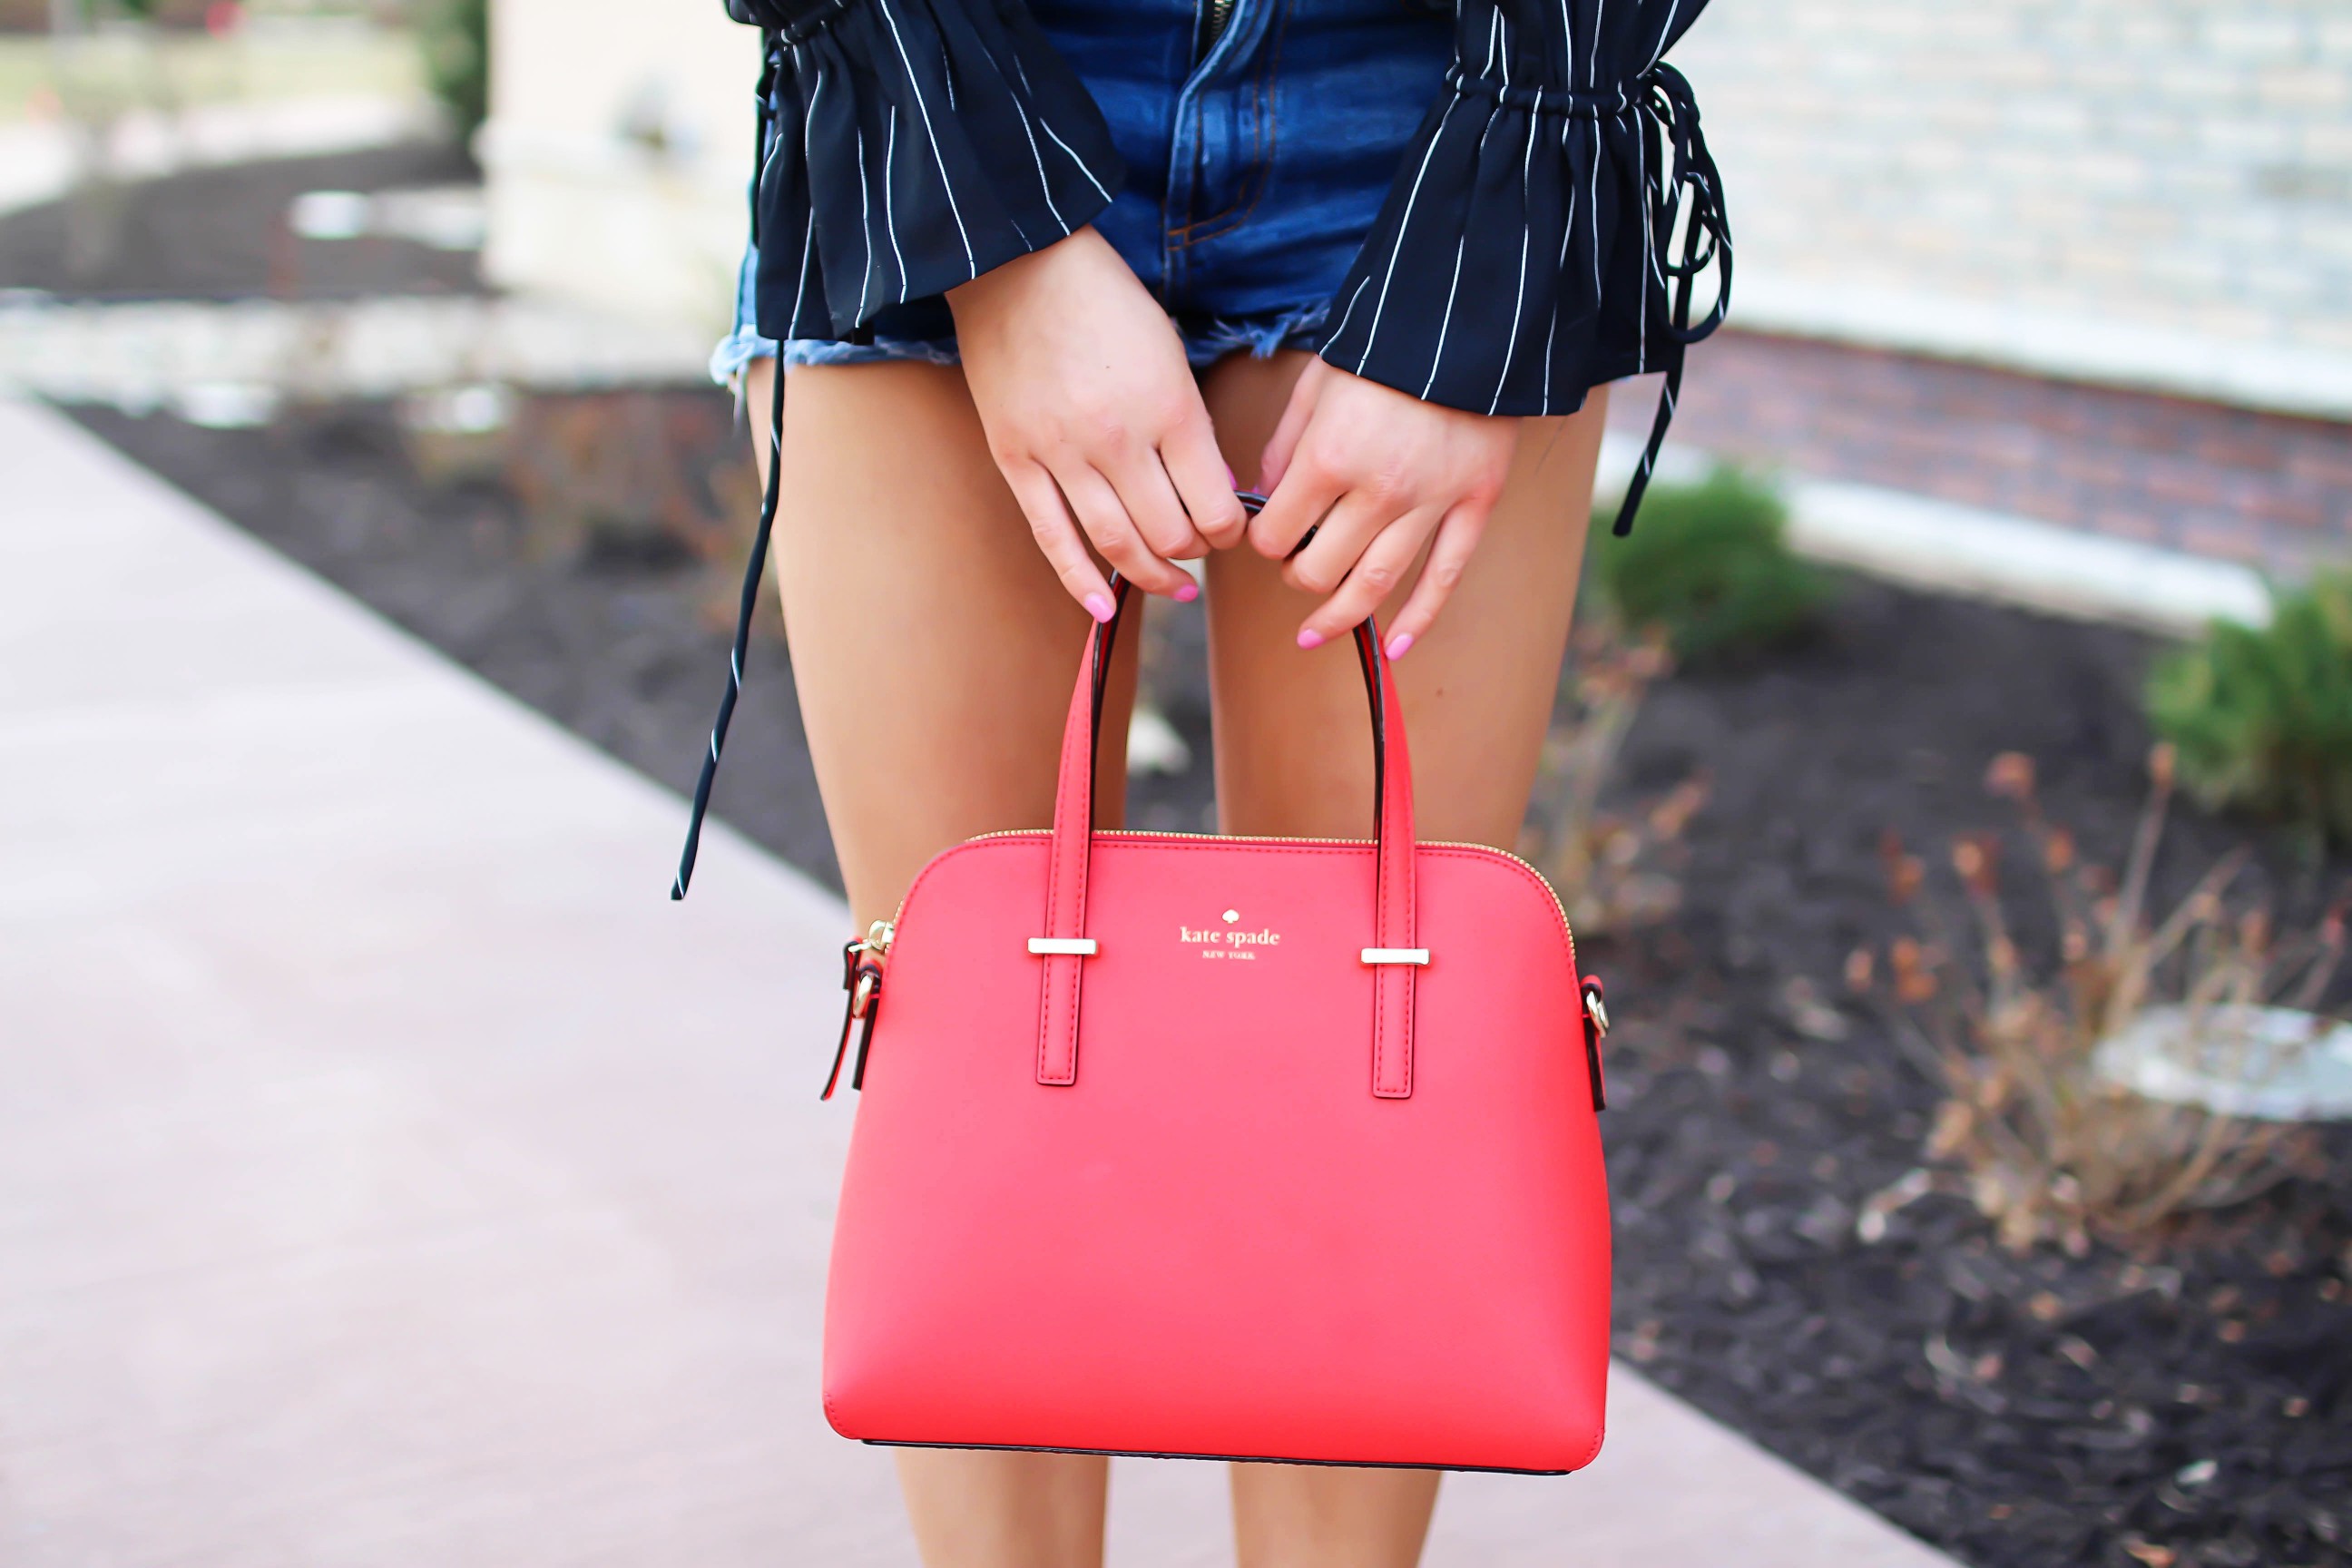 The cutest black striped off the shoulder top paired with jean shorts and a red Kate Spade purse. My favorite tassel shoes go perfectly with this look! I finished off the look with my long hair in a side braid. I love this outfit idea! By Lauren Lindmark on daily dose of charm dailydoseofcharm.com